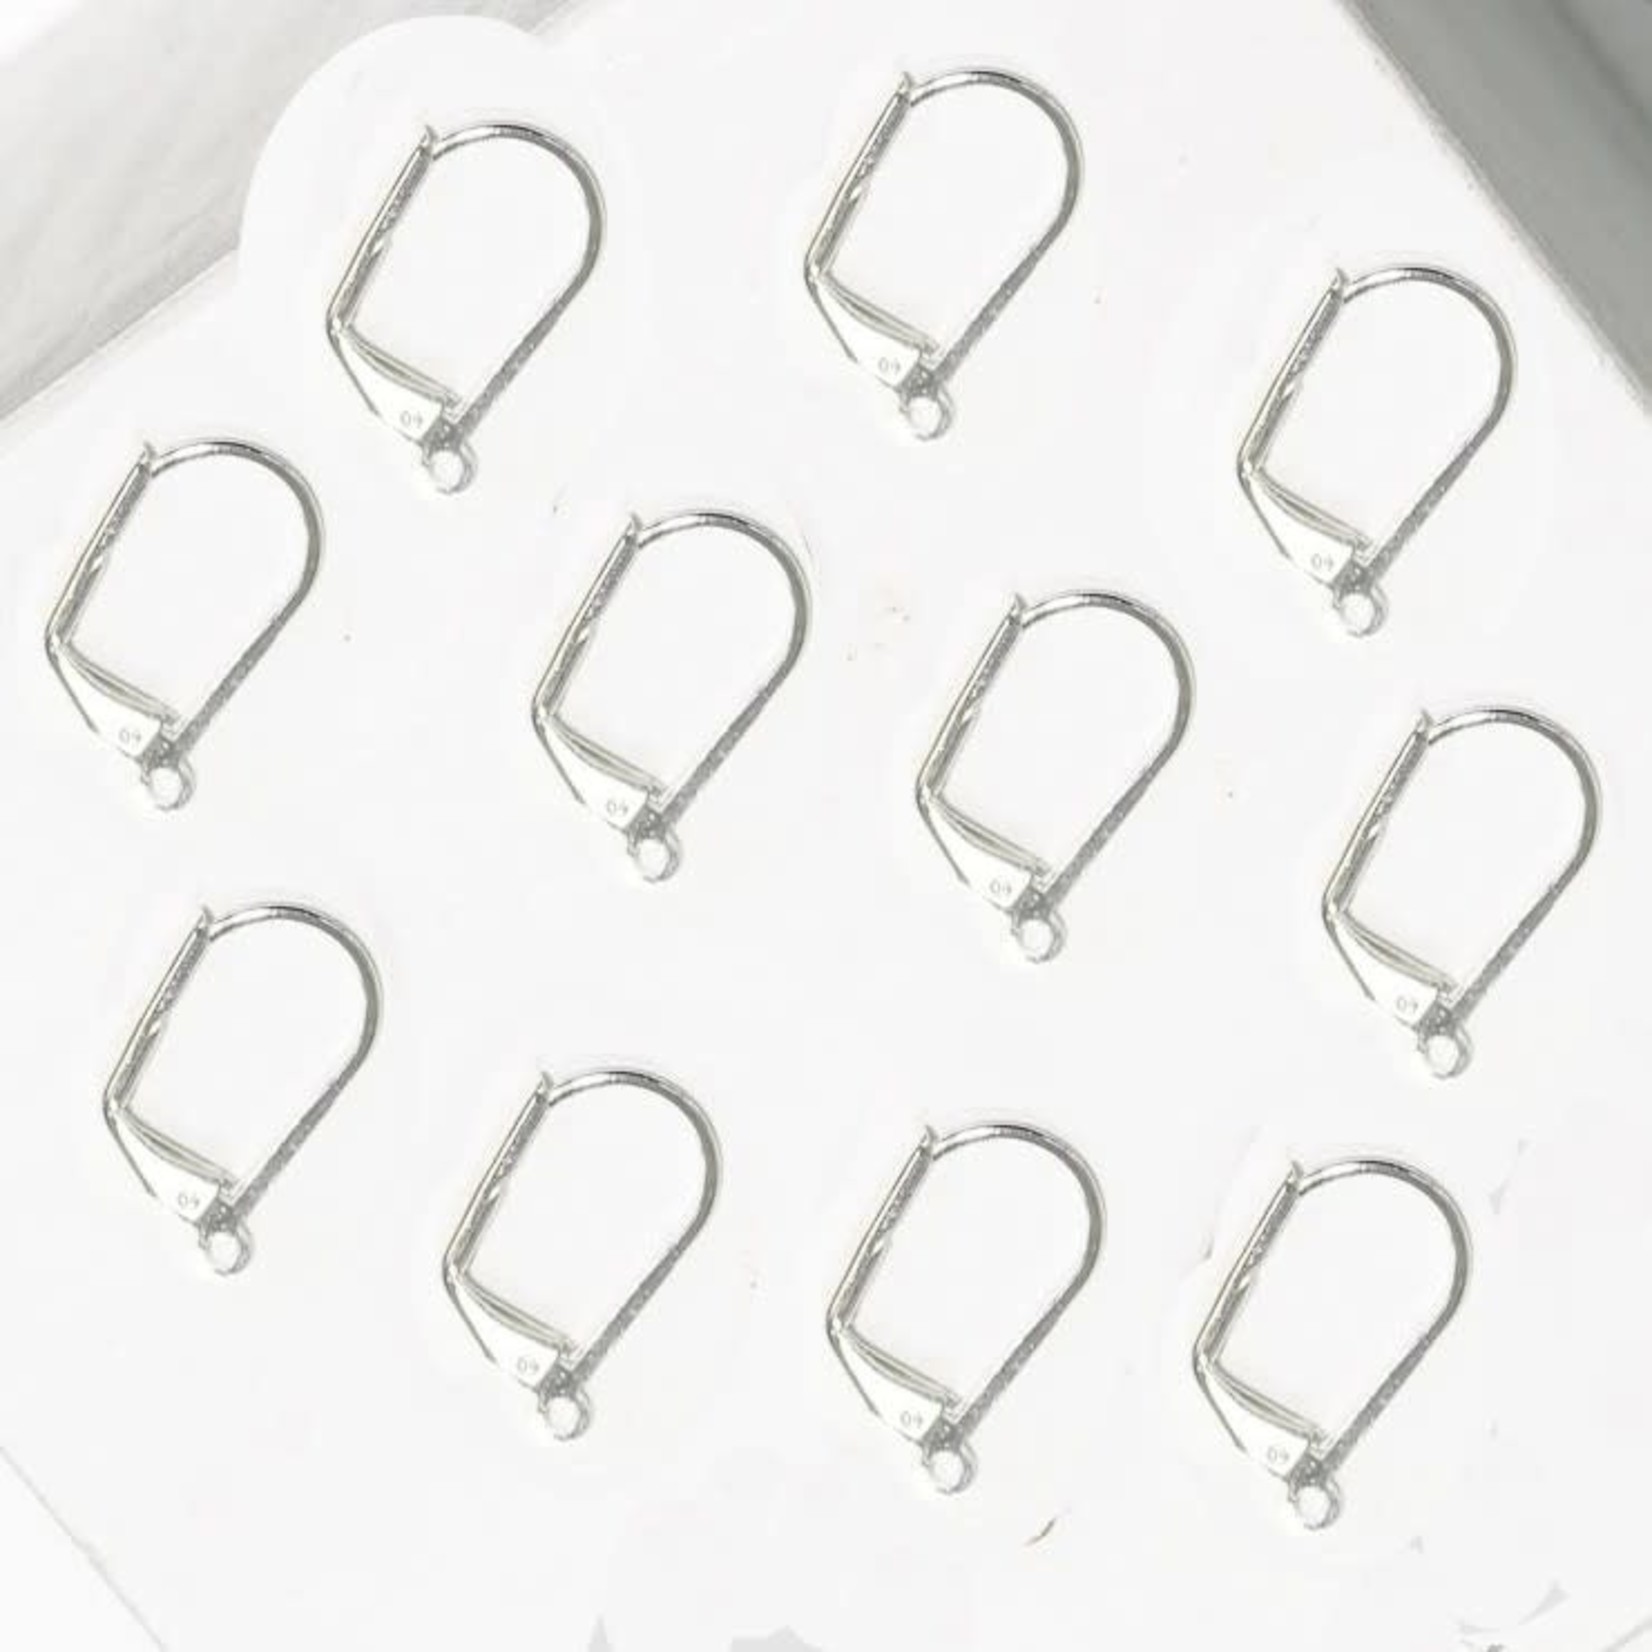 Silver Plated Leverback Earwire Nickel-Free - 10 pieces